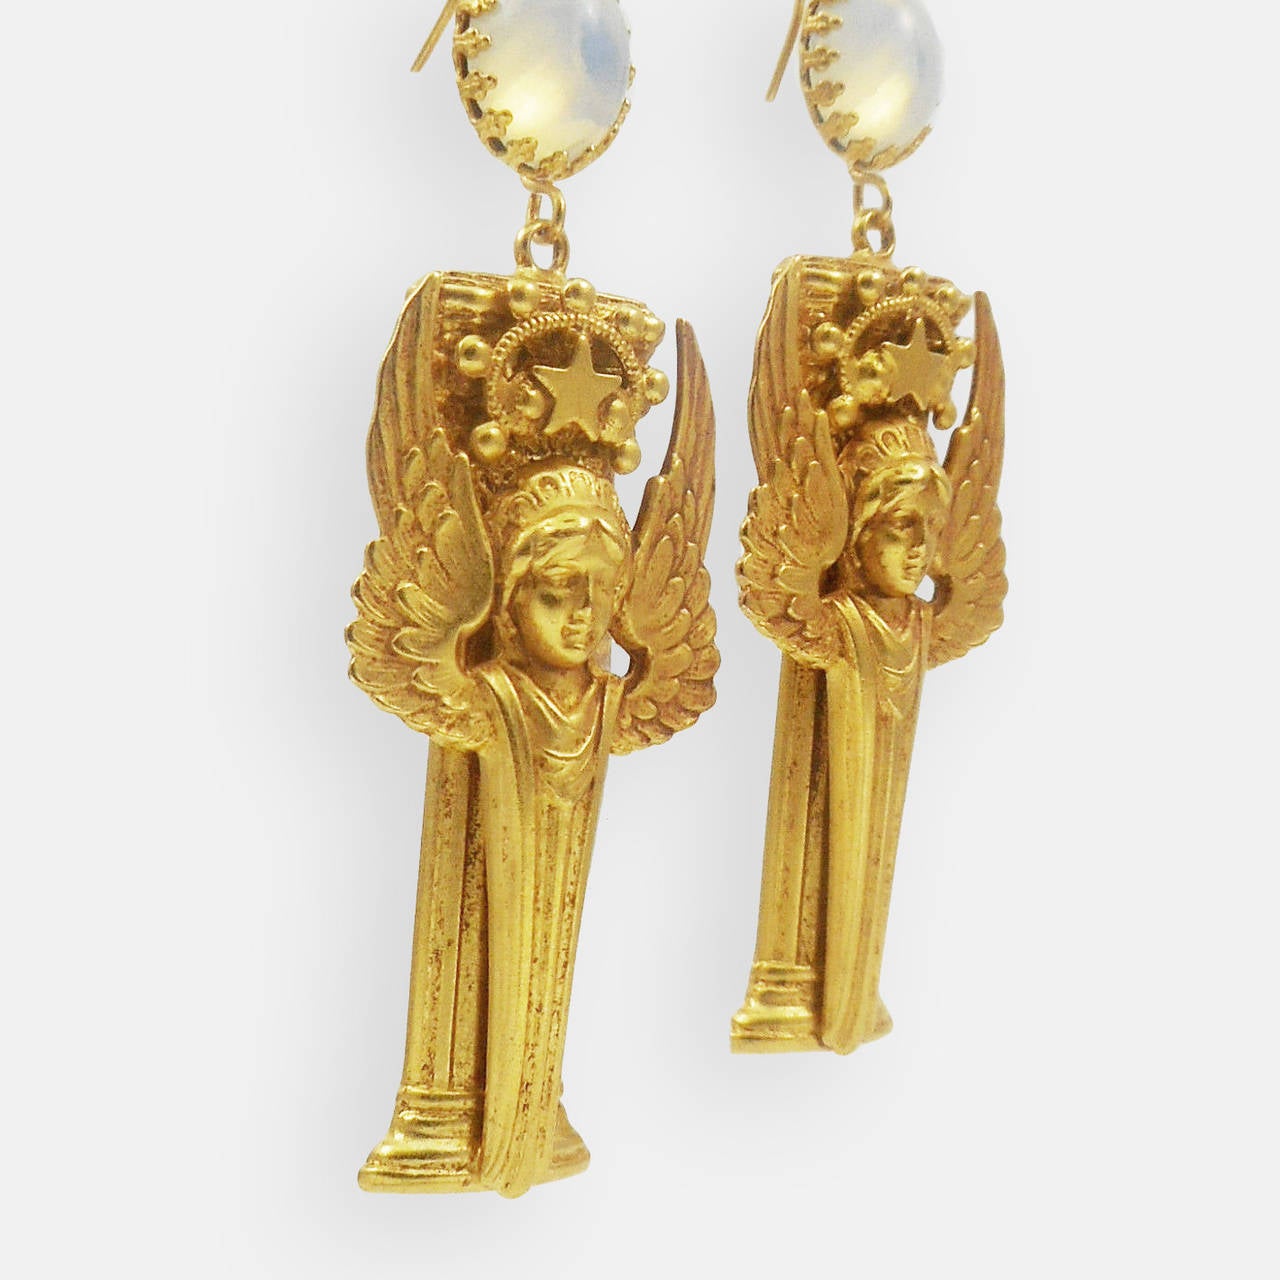  Wonderful pair of Dangle Earrings featuring Winged Goddesses  with Columns and  Stars and Scroll Decorations; Antiqued Gilt Brass. Goddesses are suspended from Hook Earring fittings set with Opaline Glass Cabochons in Crown Edged Settings. Earrings